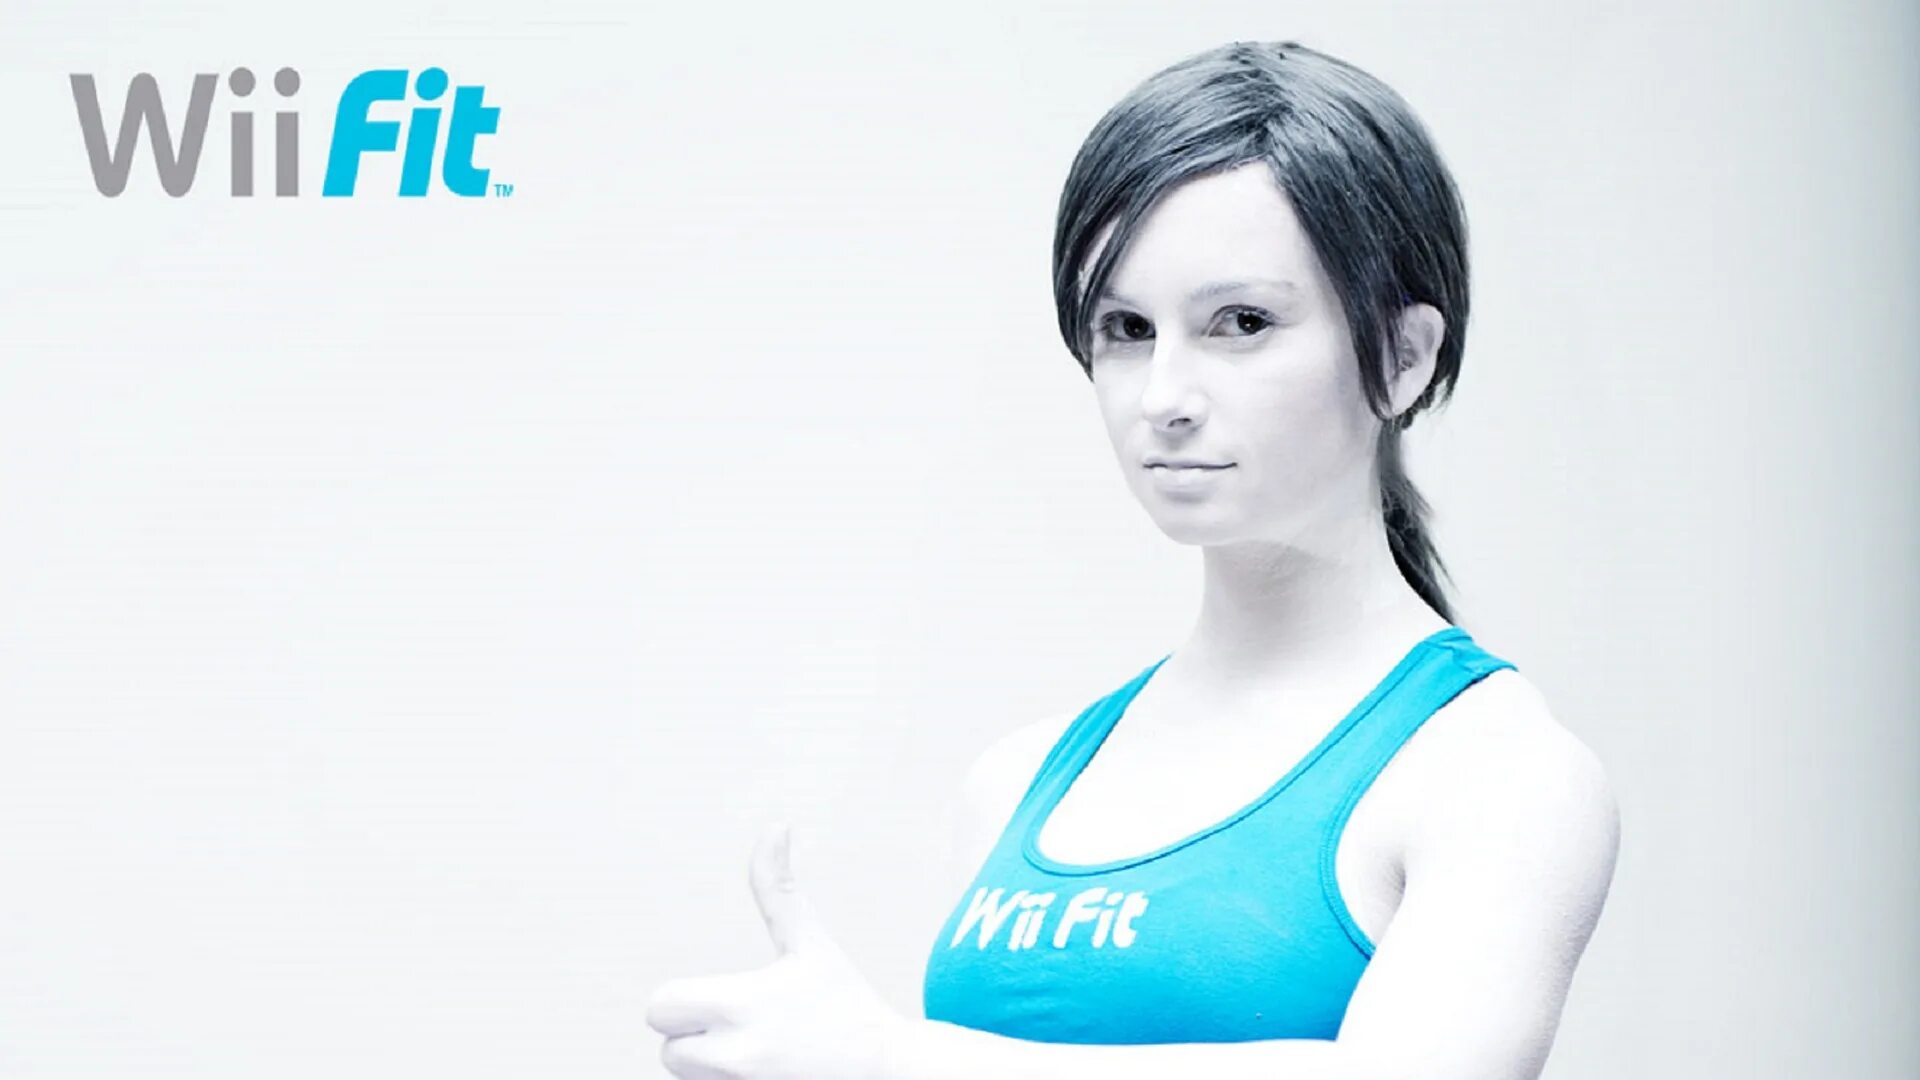 Wii Fit тренер. Wii Trainer Fit Cosplay. Тренер Wii Fit женщина. Тренер Wii Fit man.